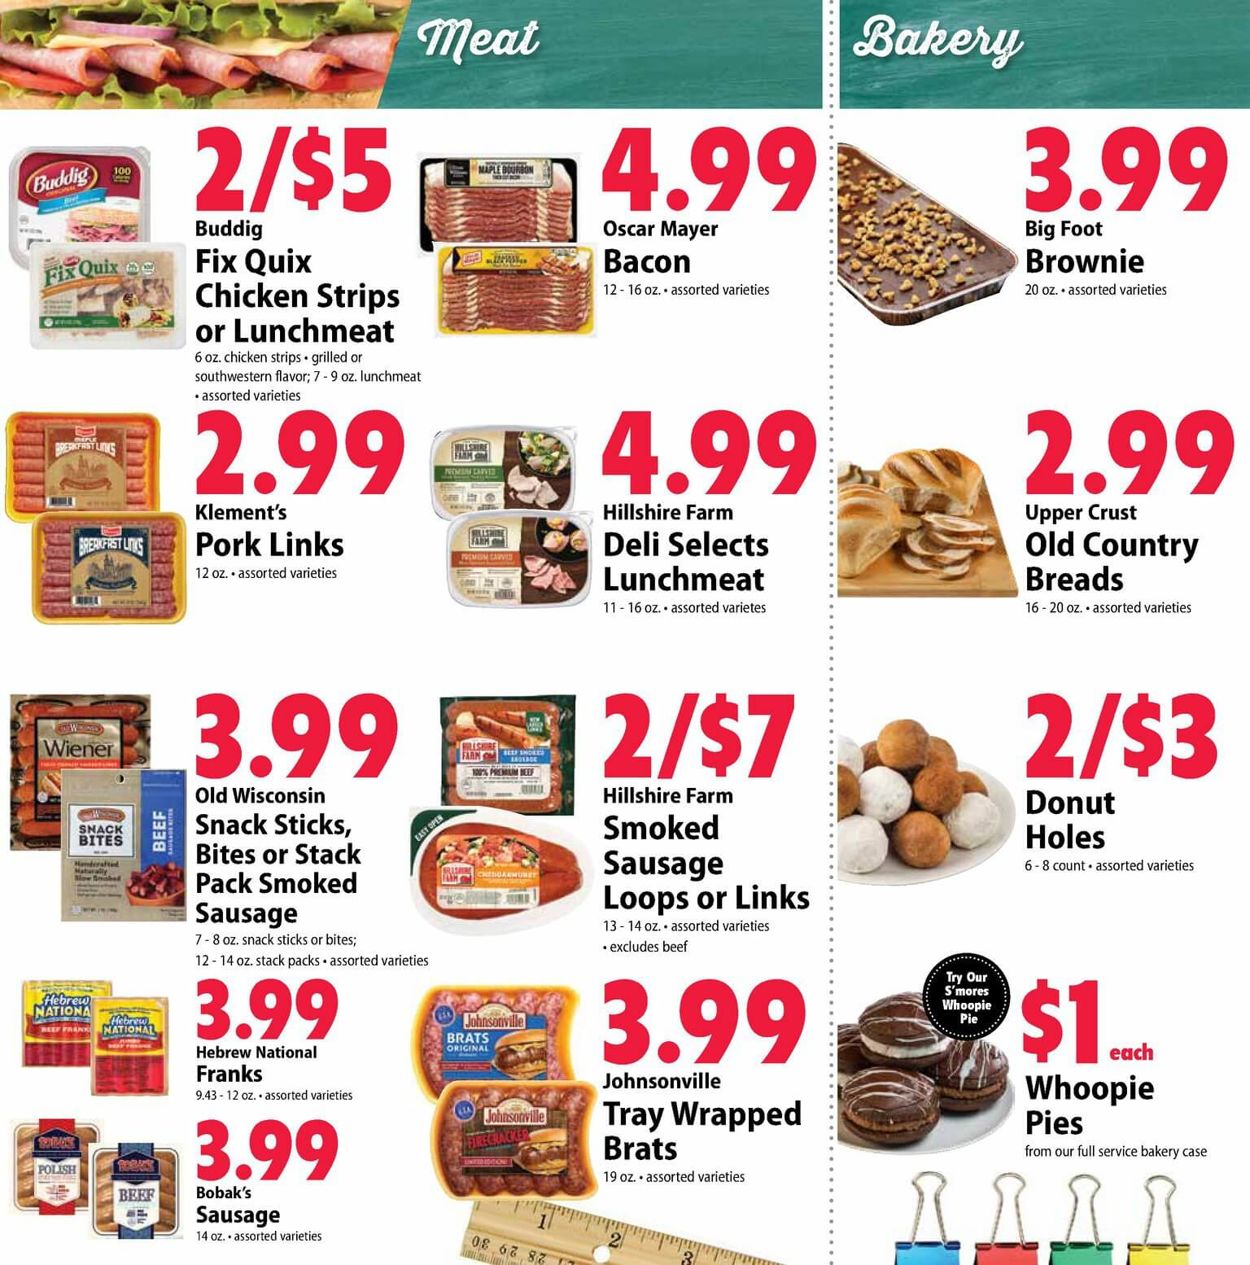 Festival Foods Current weekly ad 08/14 08/20/2019 [9]